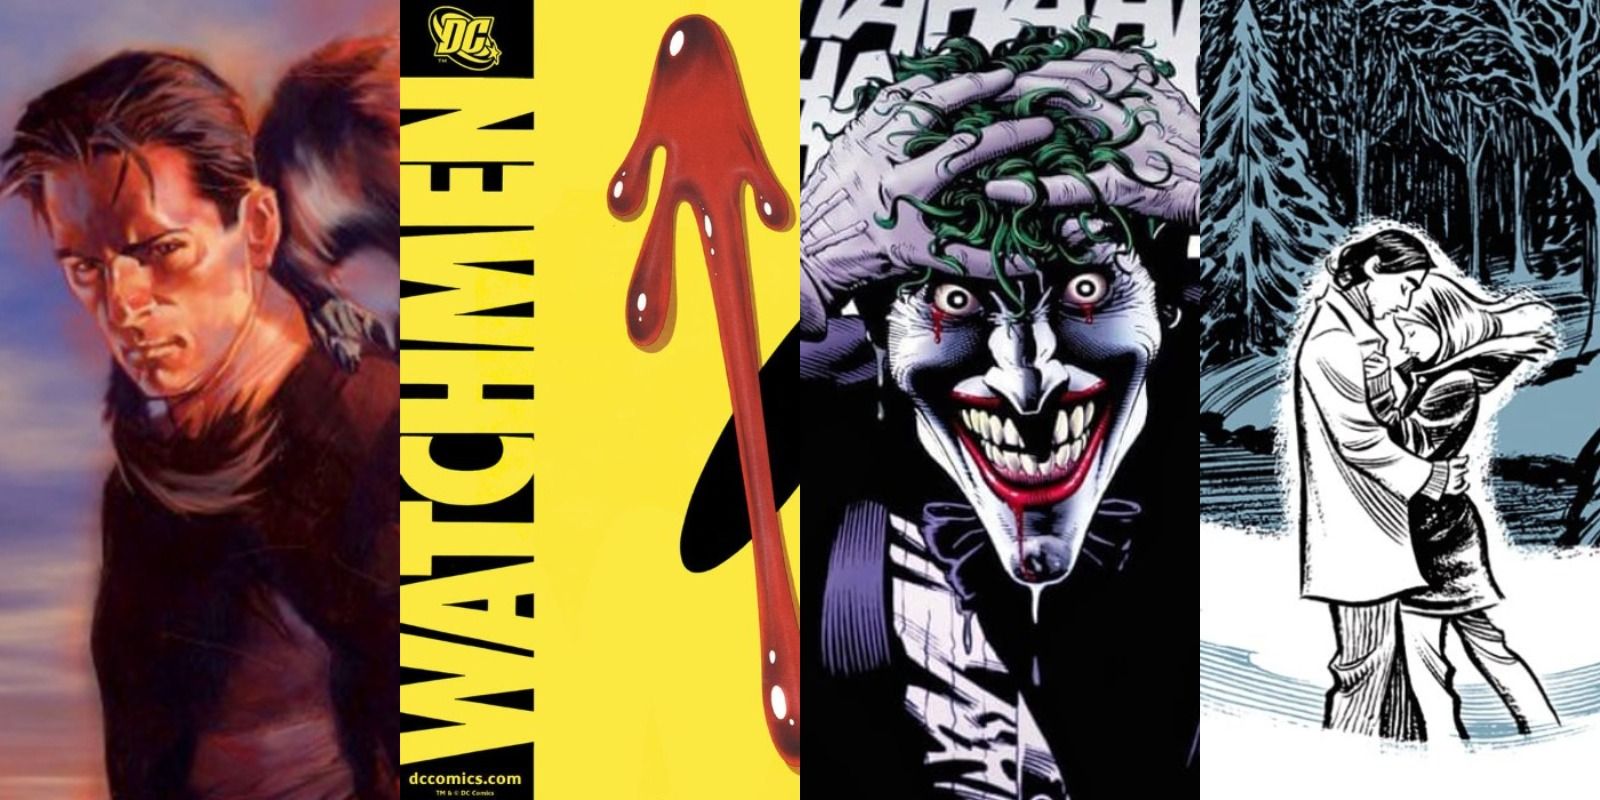 10 Best Comic Books Of All Time, According To Goodreads